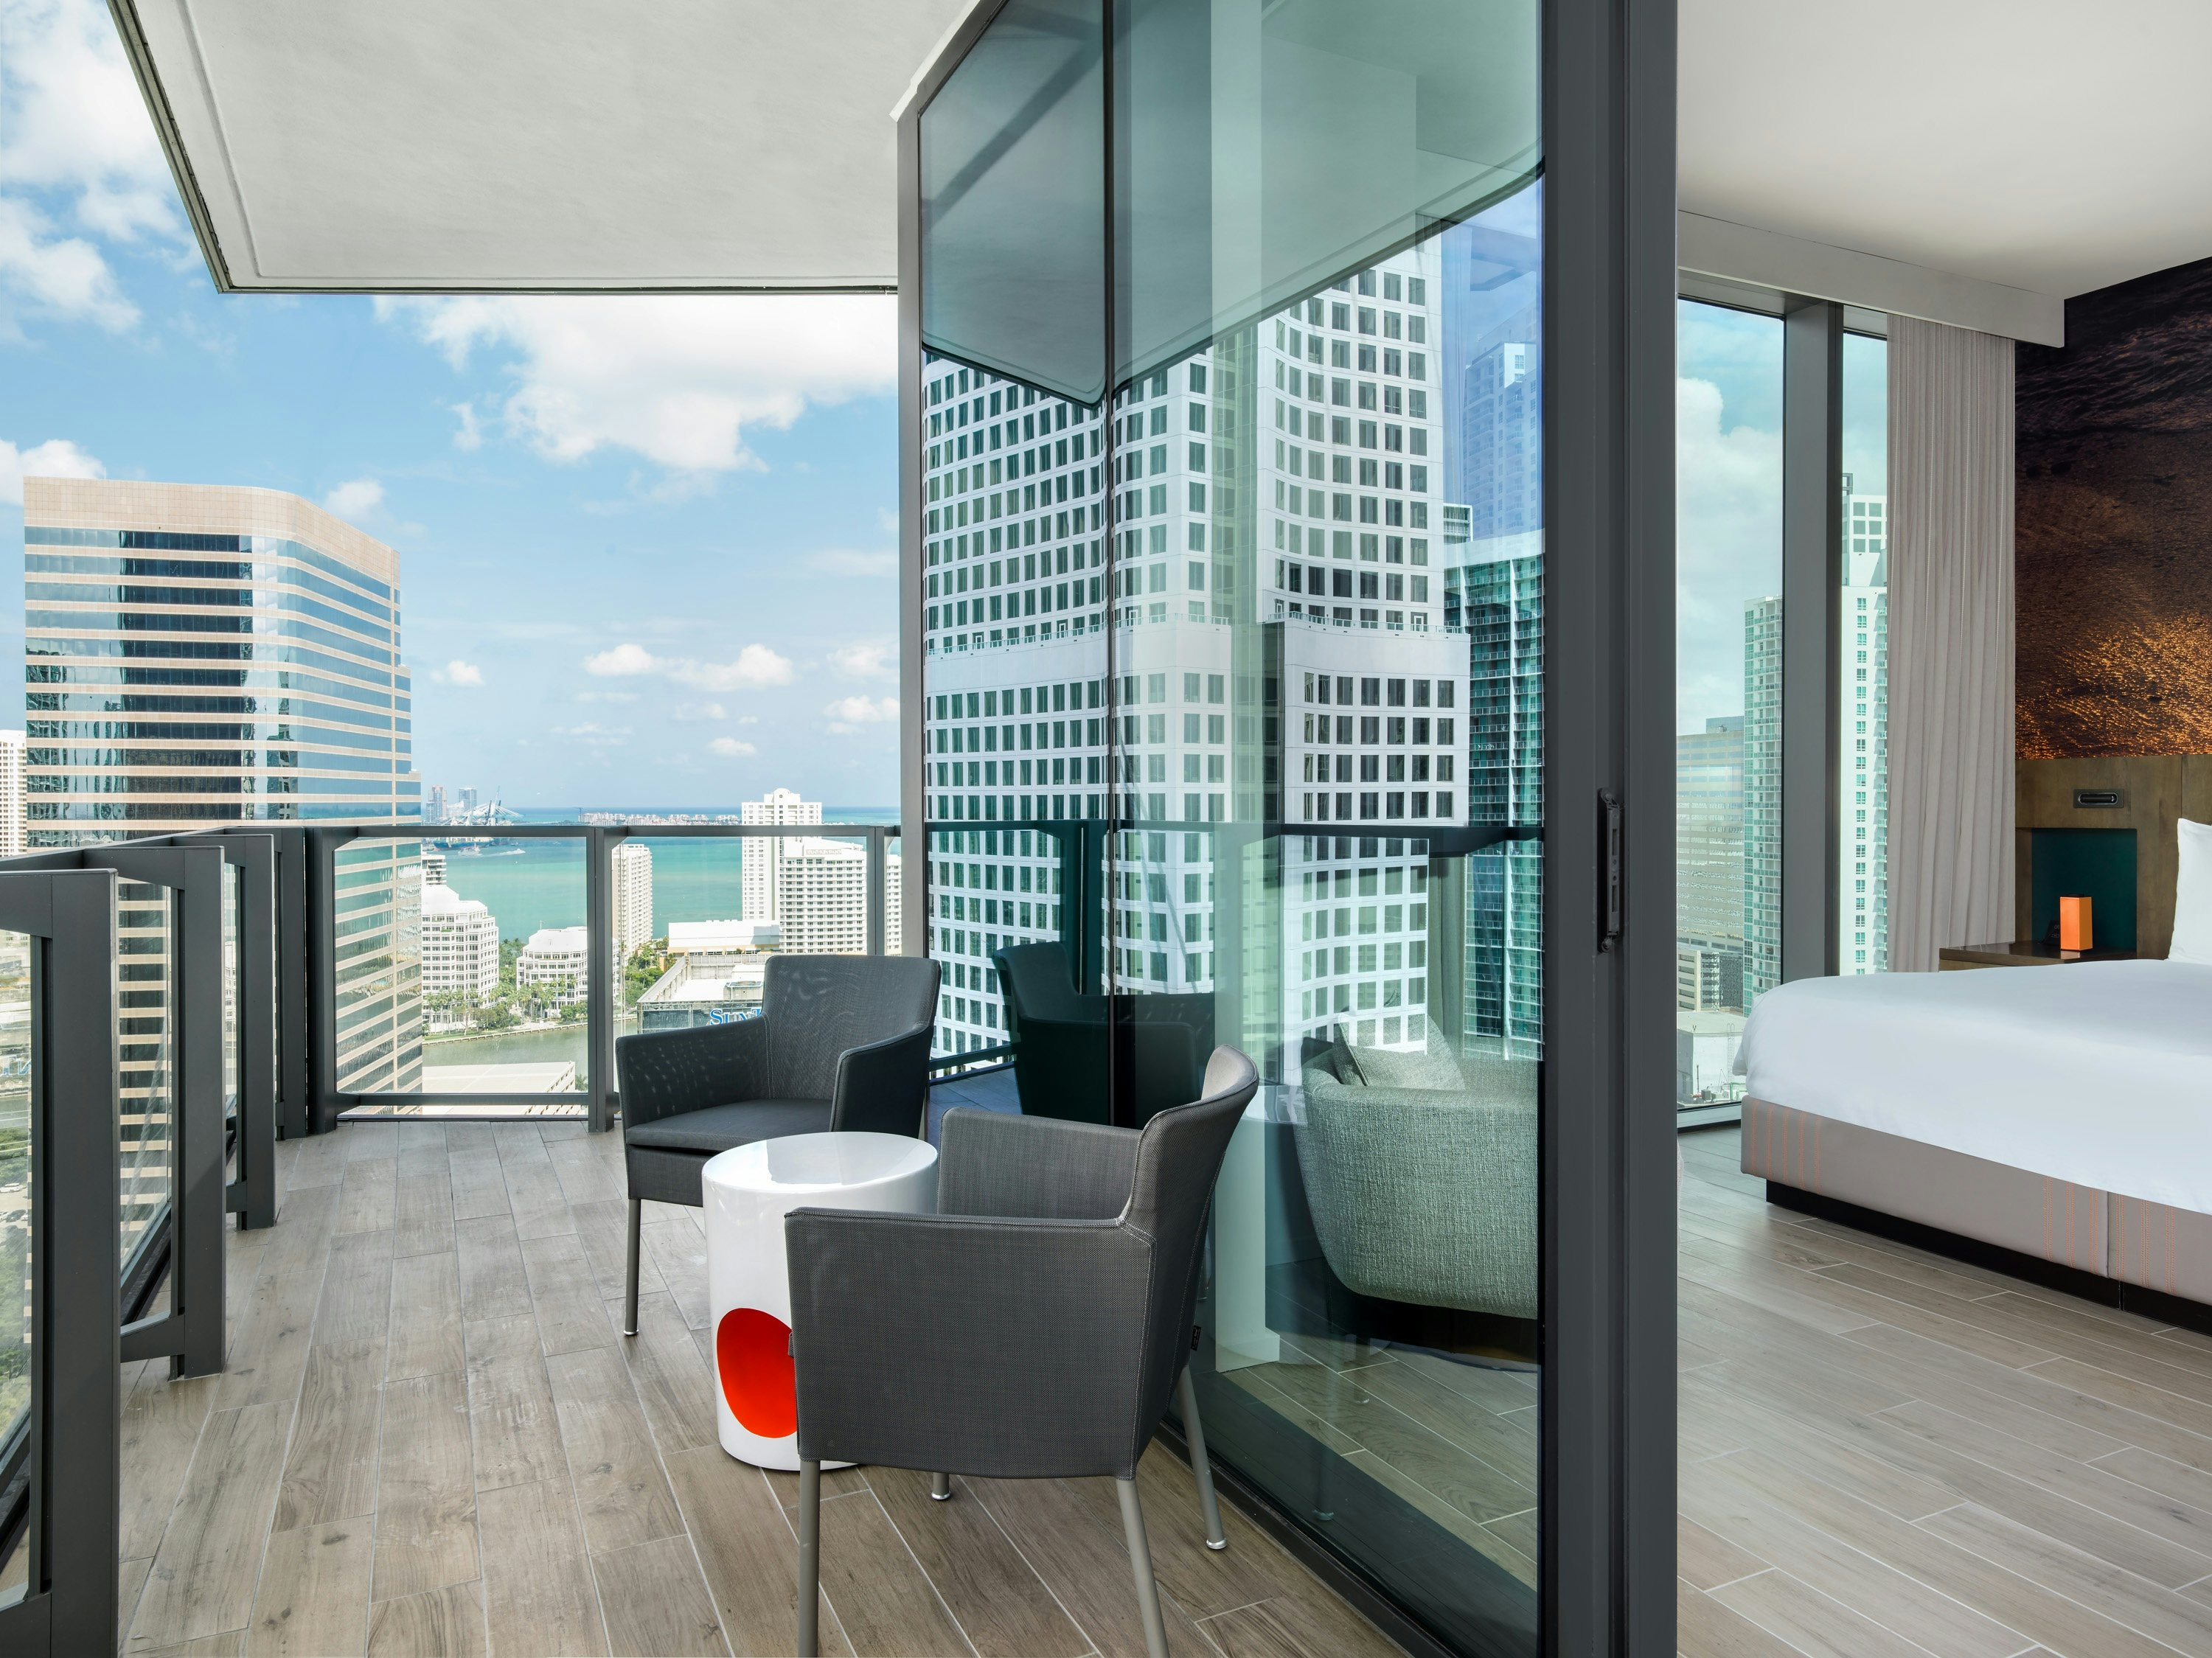 EAST Miami's rooms offer balcony views of Biscayne Bay. (Courtesy Photo)